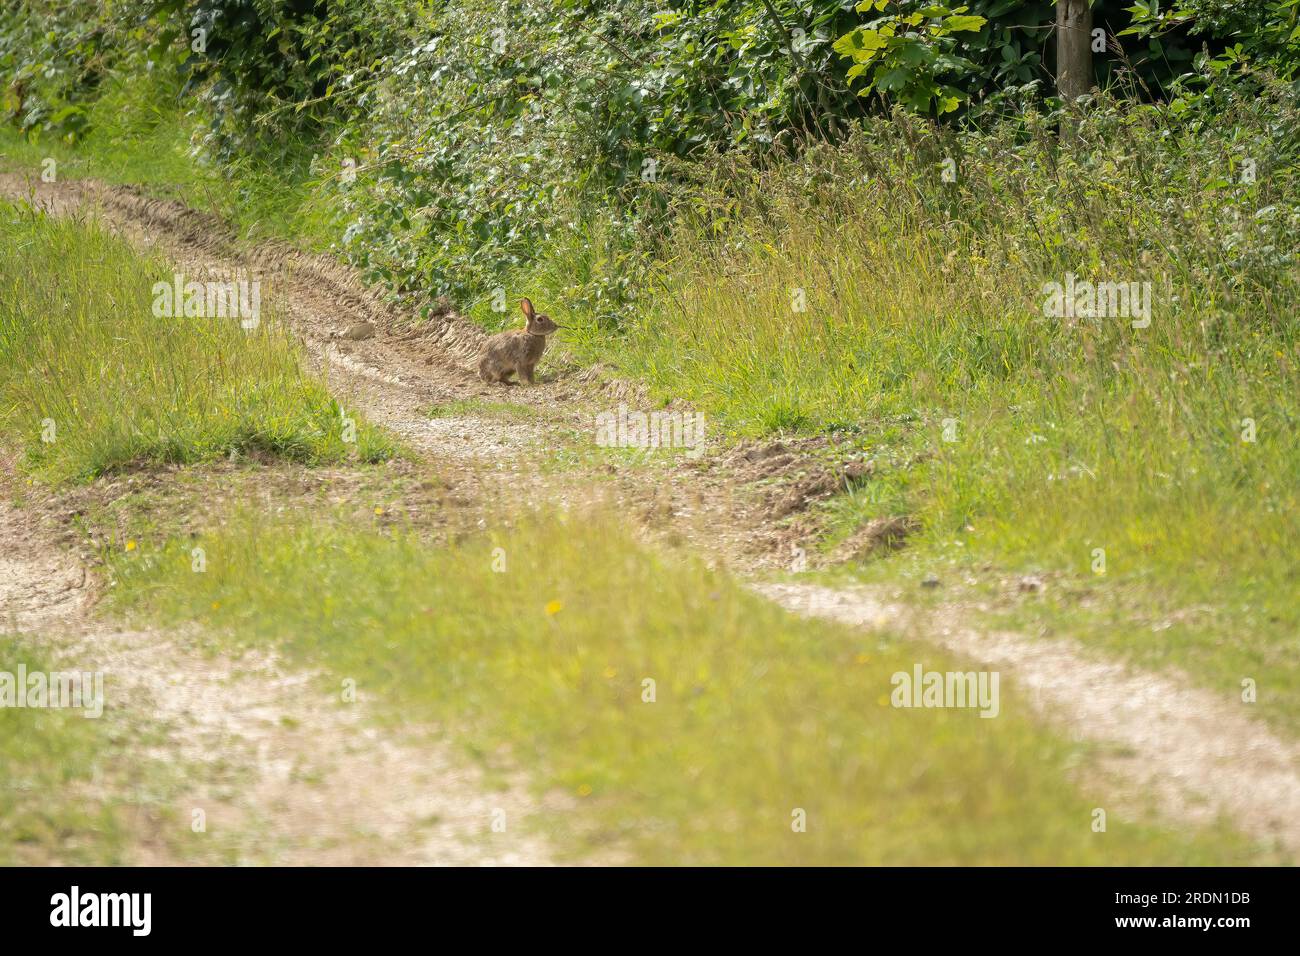 a wild young rabbit (Oryctolagus cuniculus) with brown fur glistening in the sunshine Stock Photo